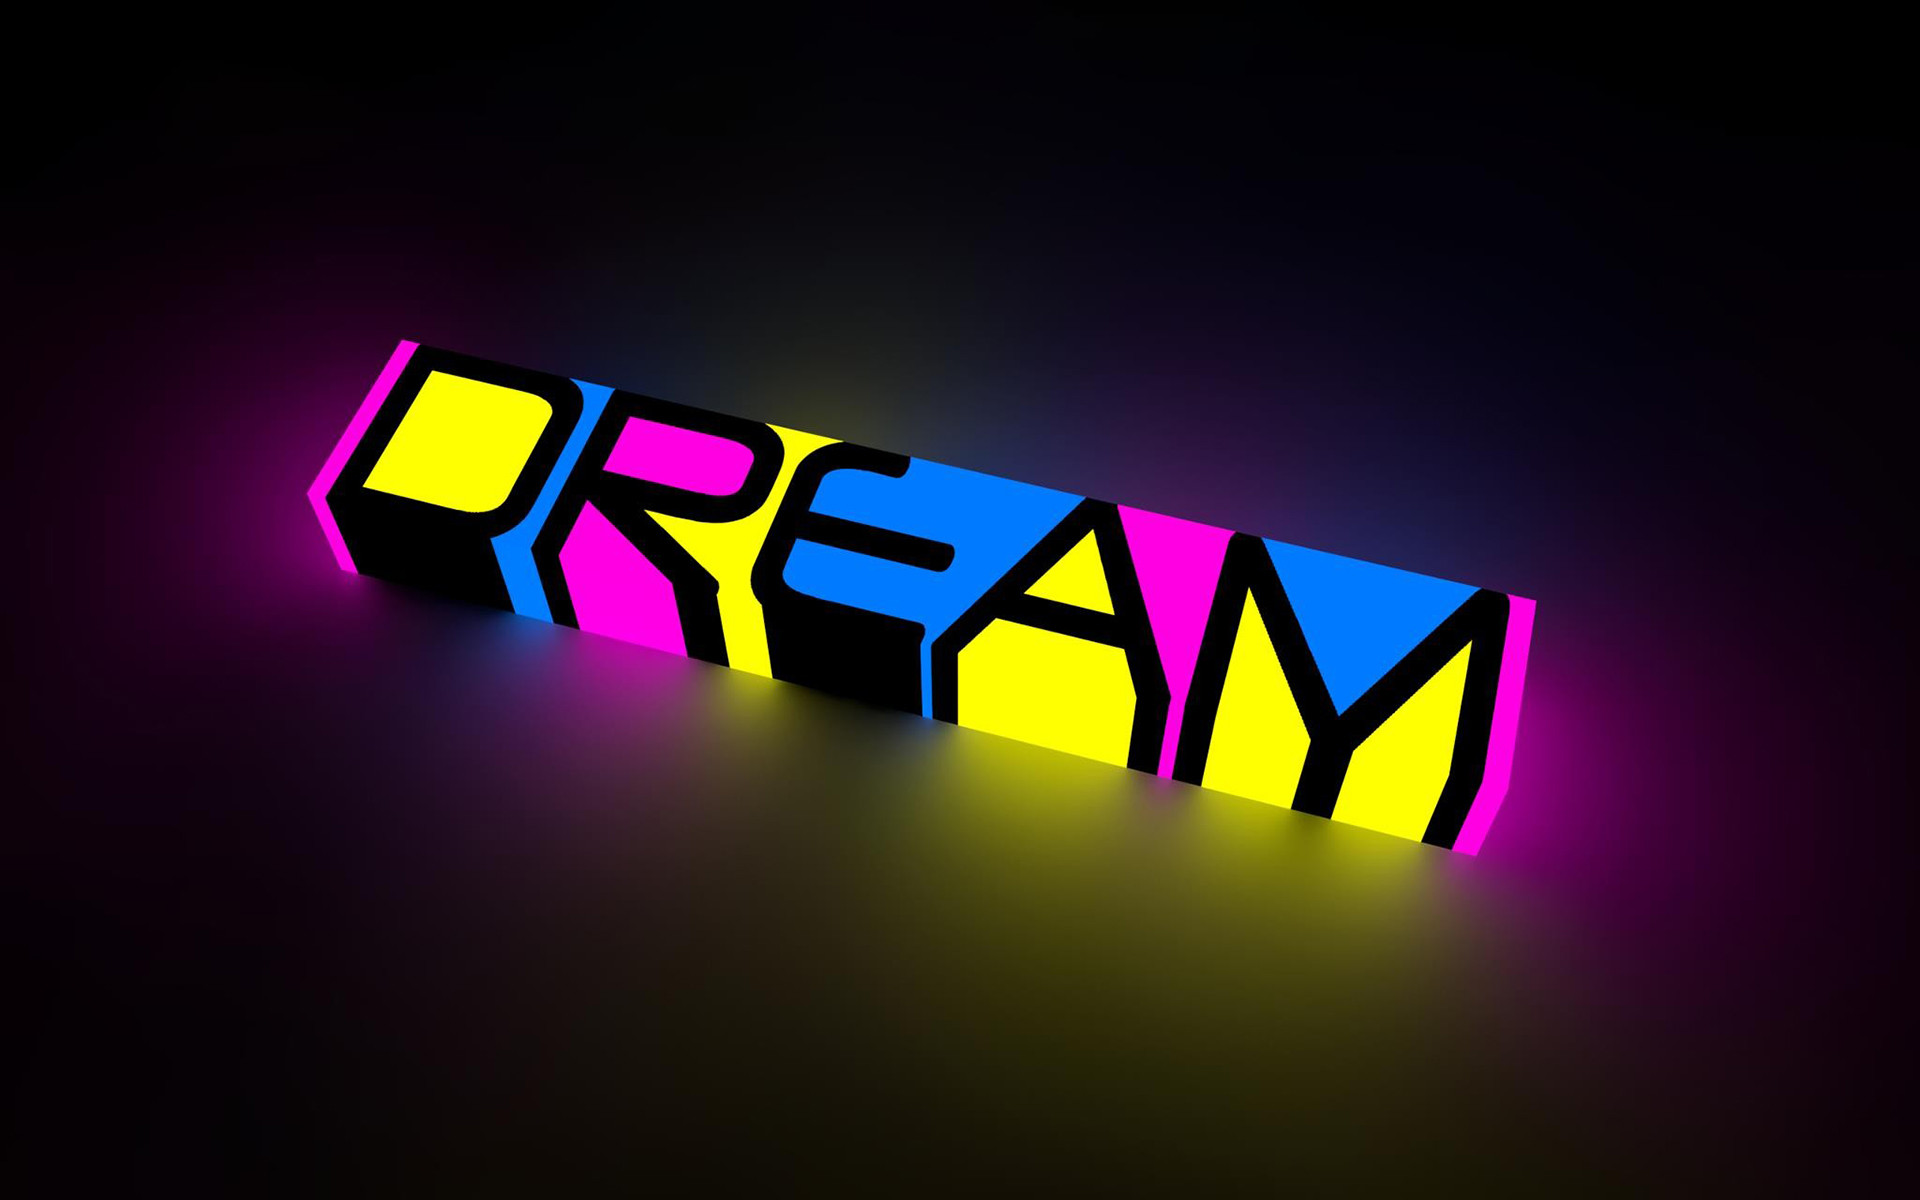 1920x1200 dream, text, motivational, statement, color, display, bright,abstract,  words, peace humor images, letters,hd abstract wallpapers, inspiration, neon  ...